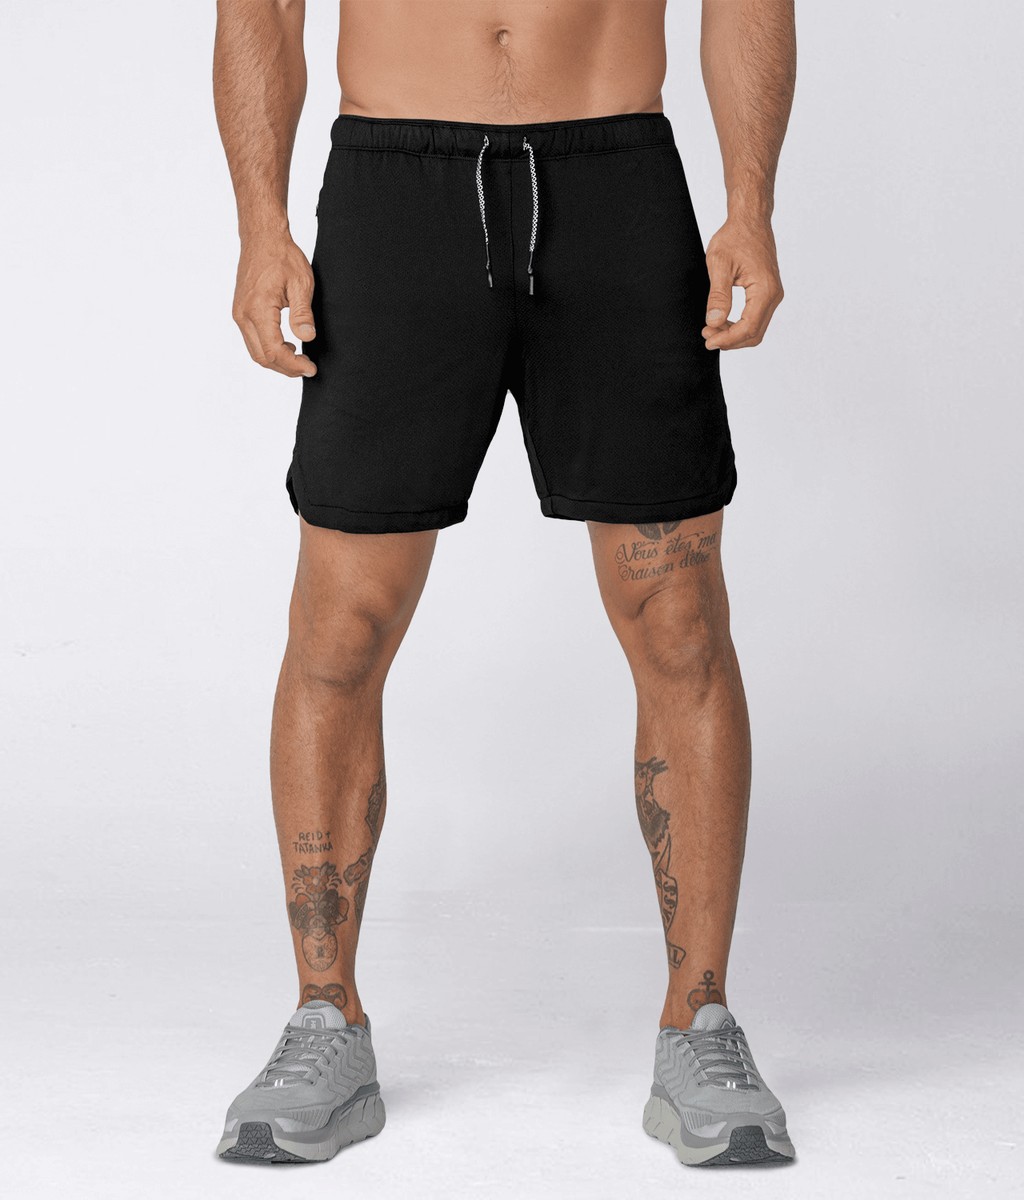 Born Tough Air Pro™ Men's 2 in 1 Black Gym Workout Shorts With